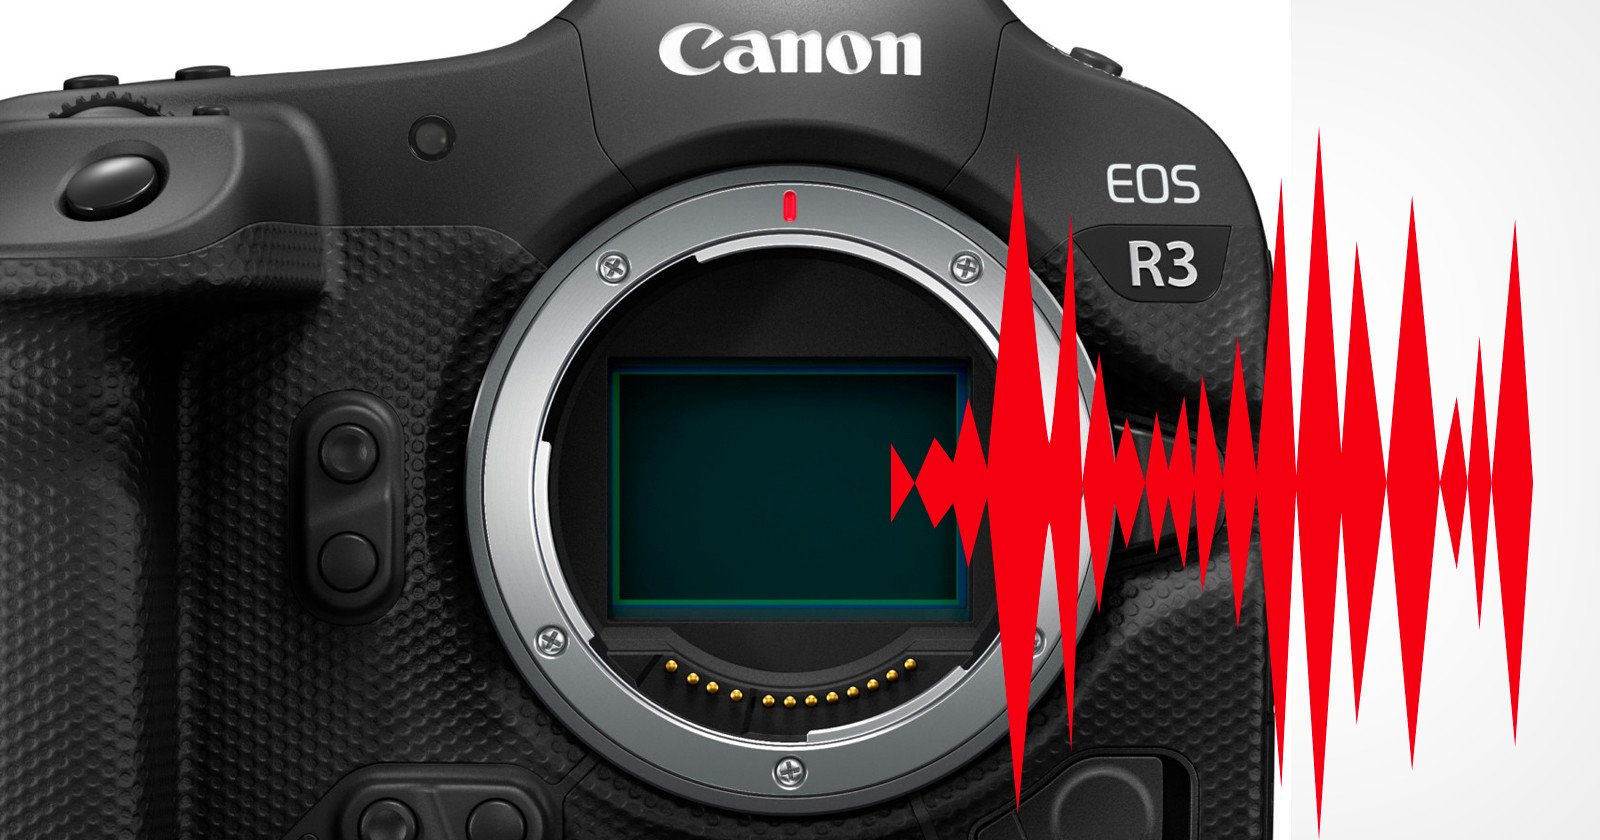 Listen to the Canon EOS R3 Shutter Fire at 30FPS